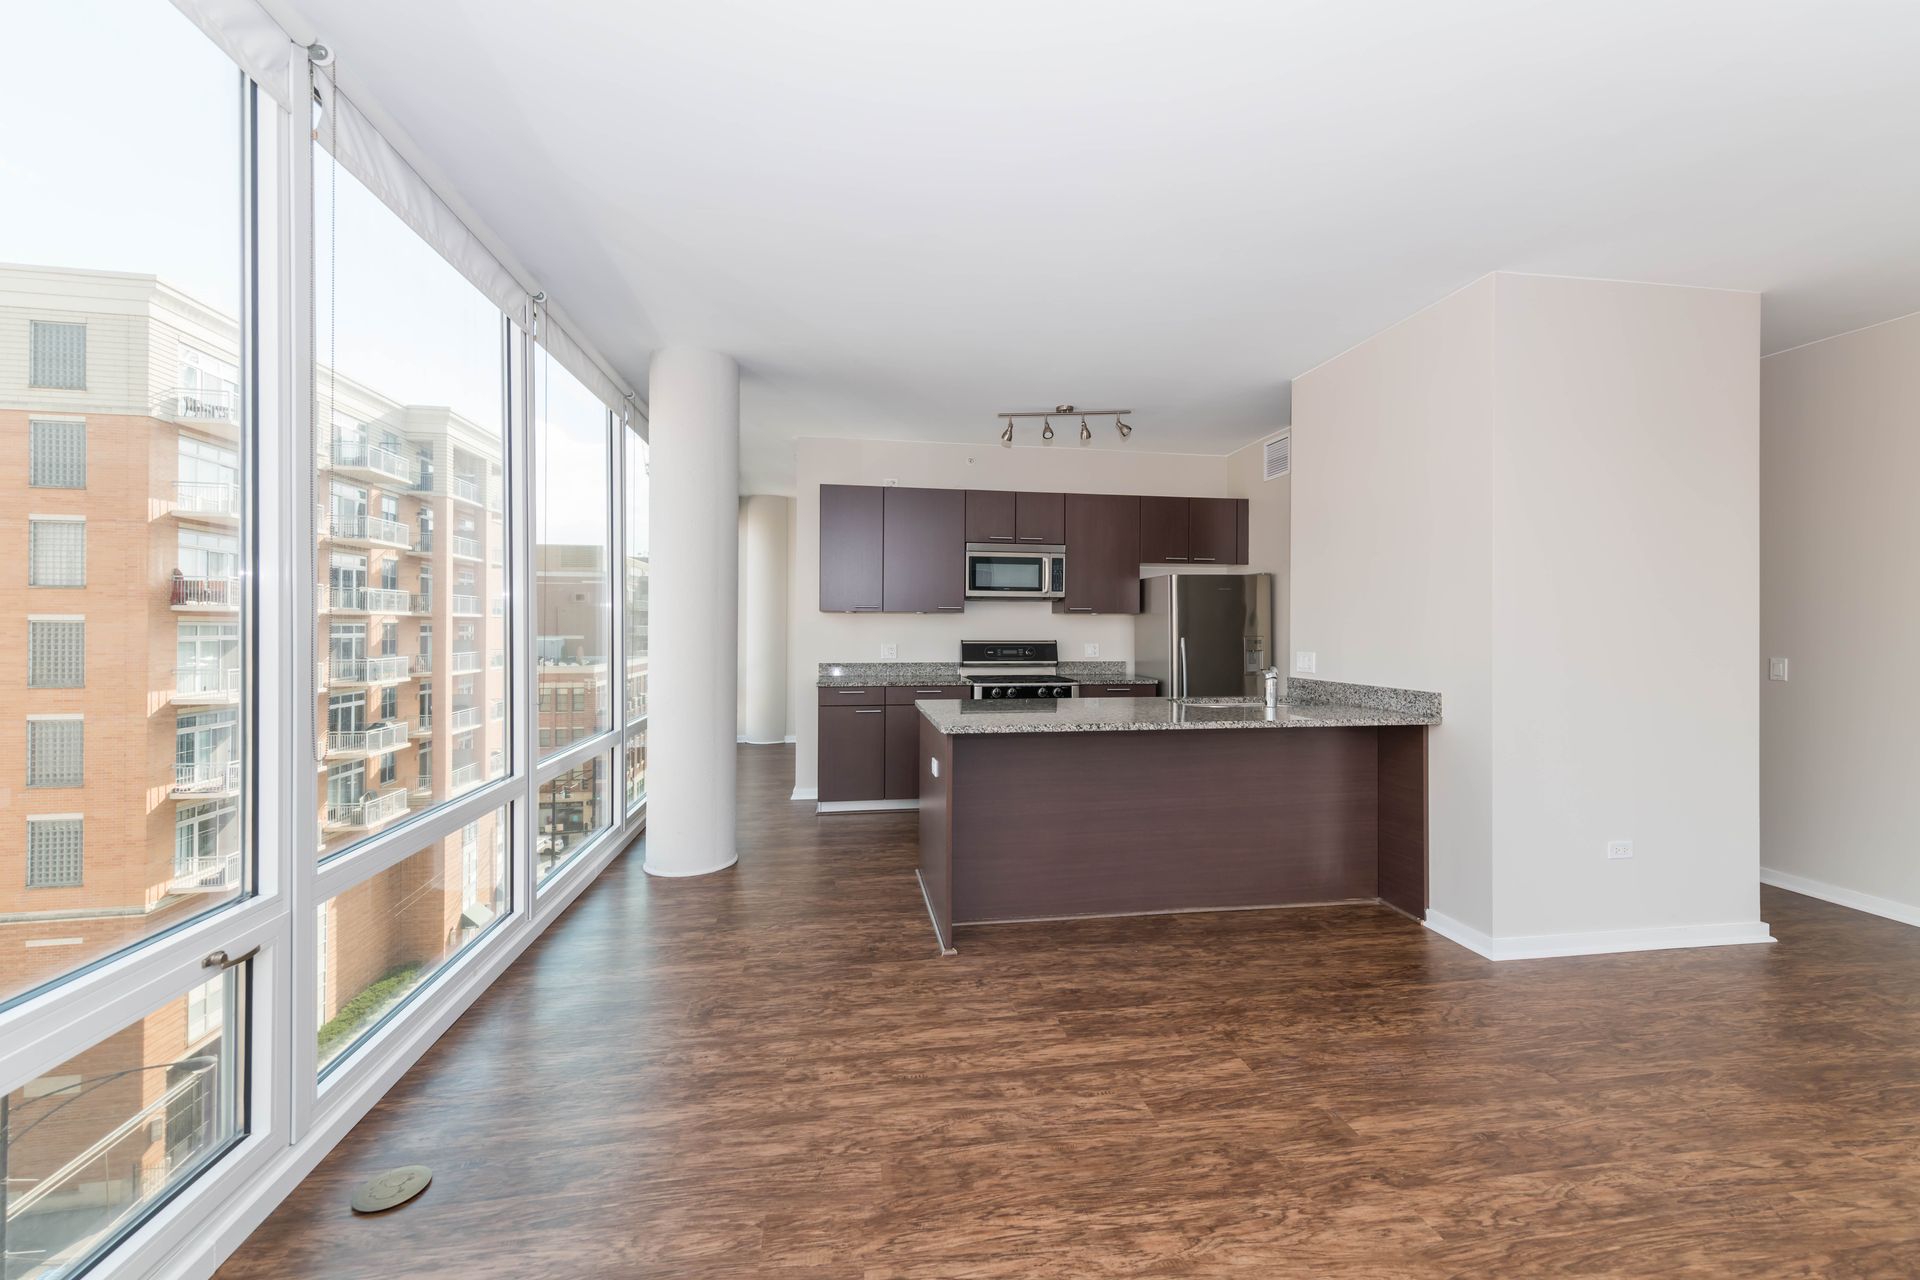 An empty apartment with a kitchen and a large window at 24 S Morgan Apartments.